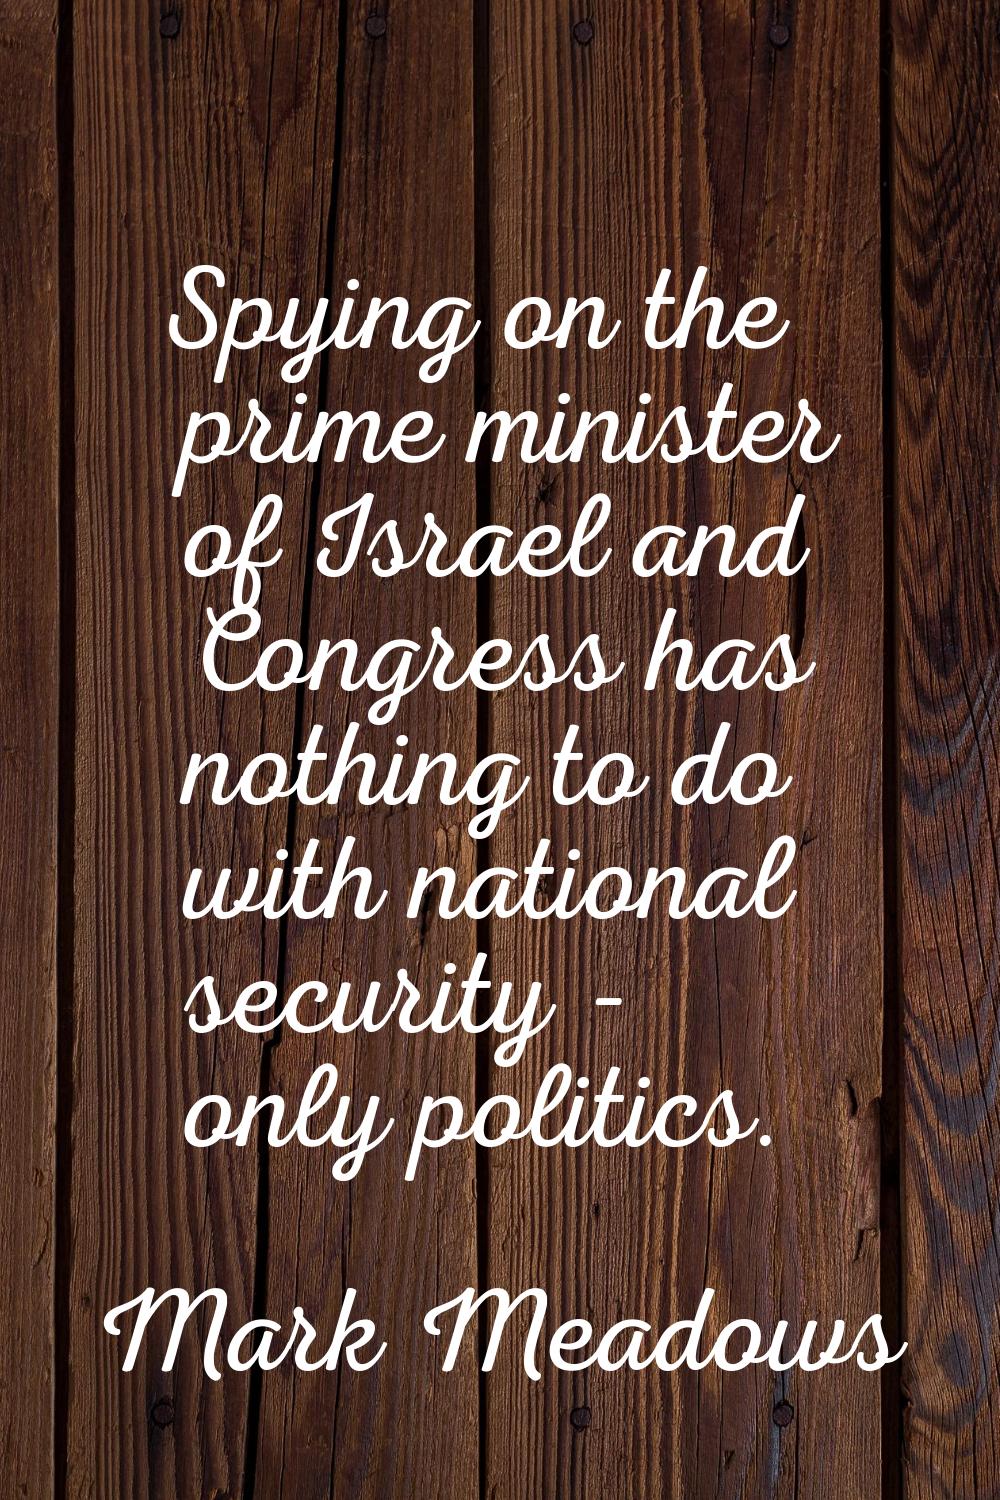 Spying on the prime minister of Israel and Congress has nothing to do with national security - only